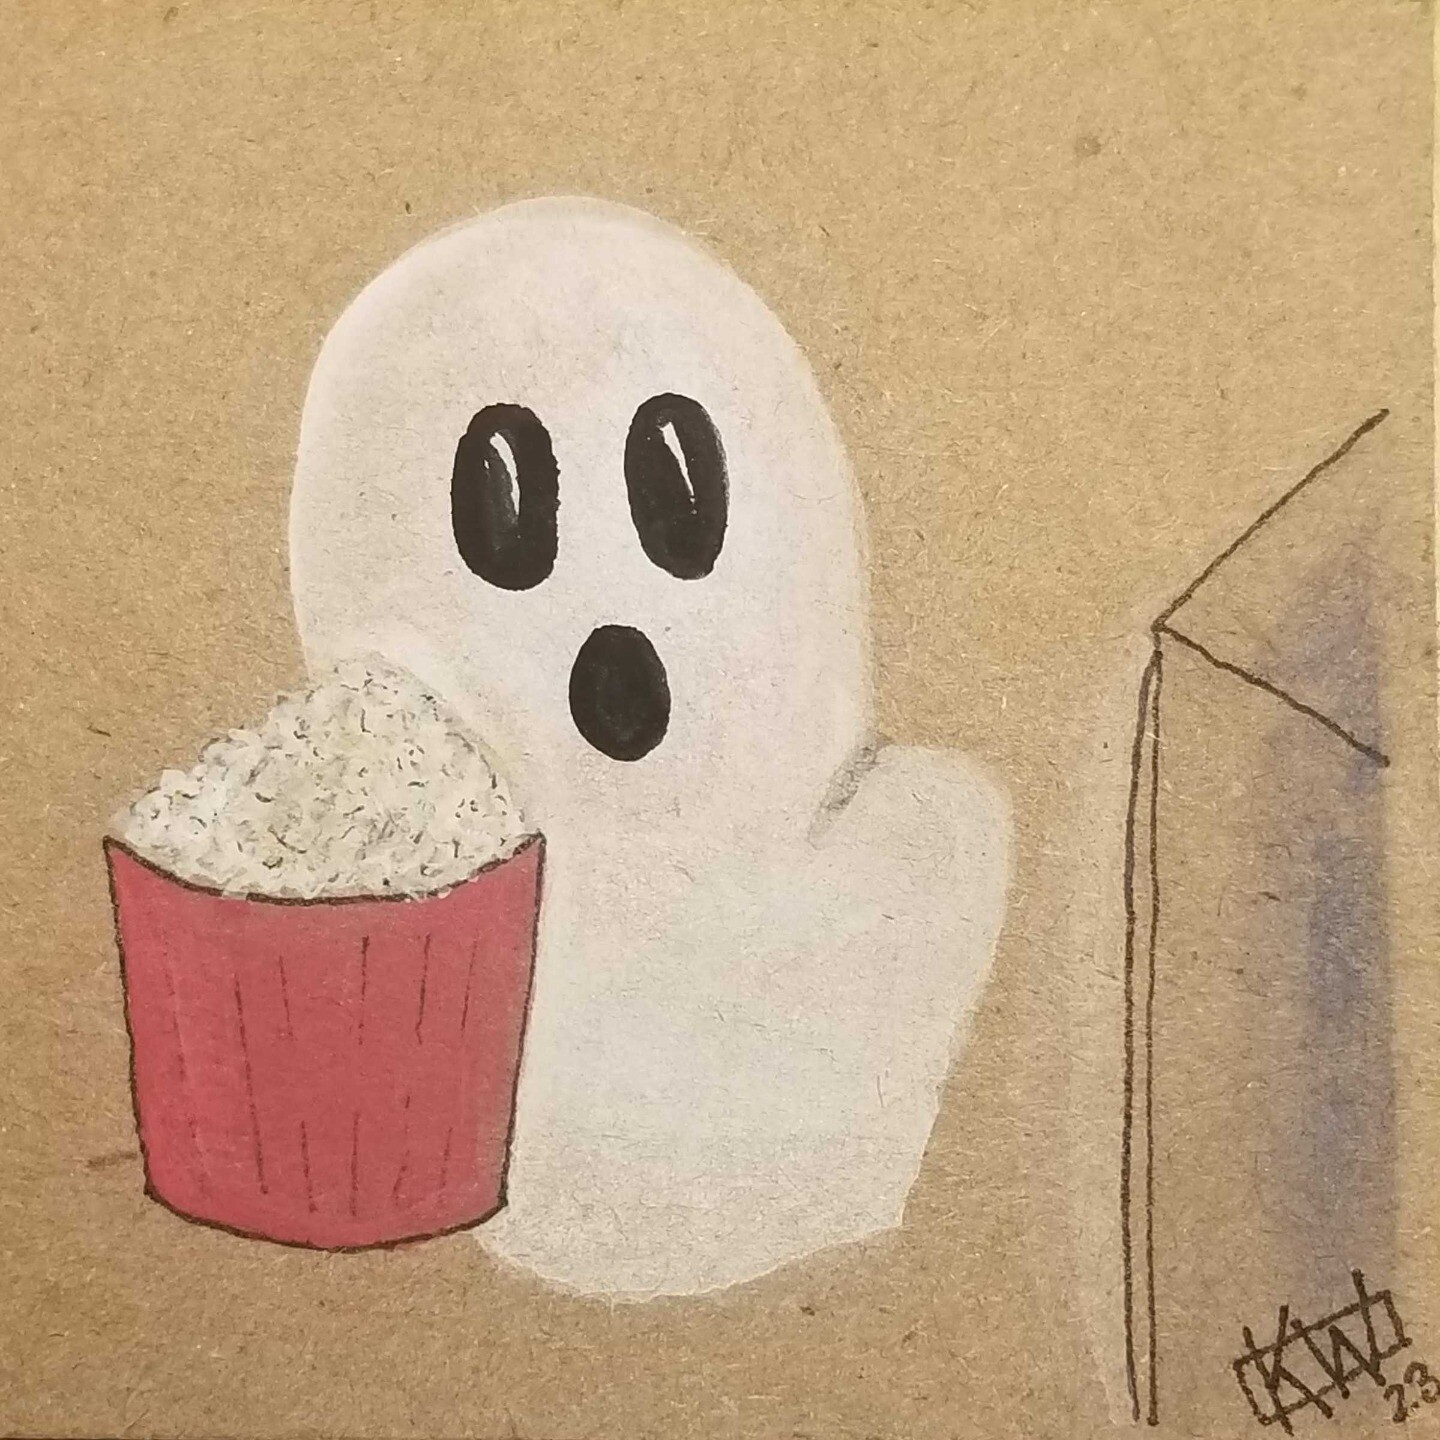 Watercolor & ink on brown cardboard. A ghost sits, transfixed, in front of a TV. A tub of popcorn sits next to the ghost.